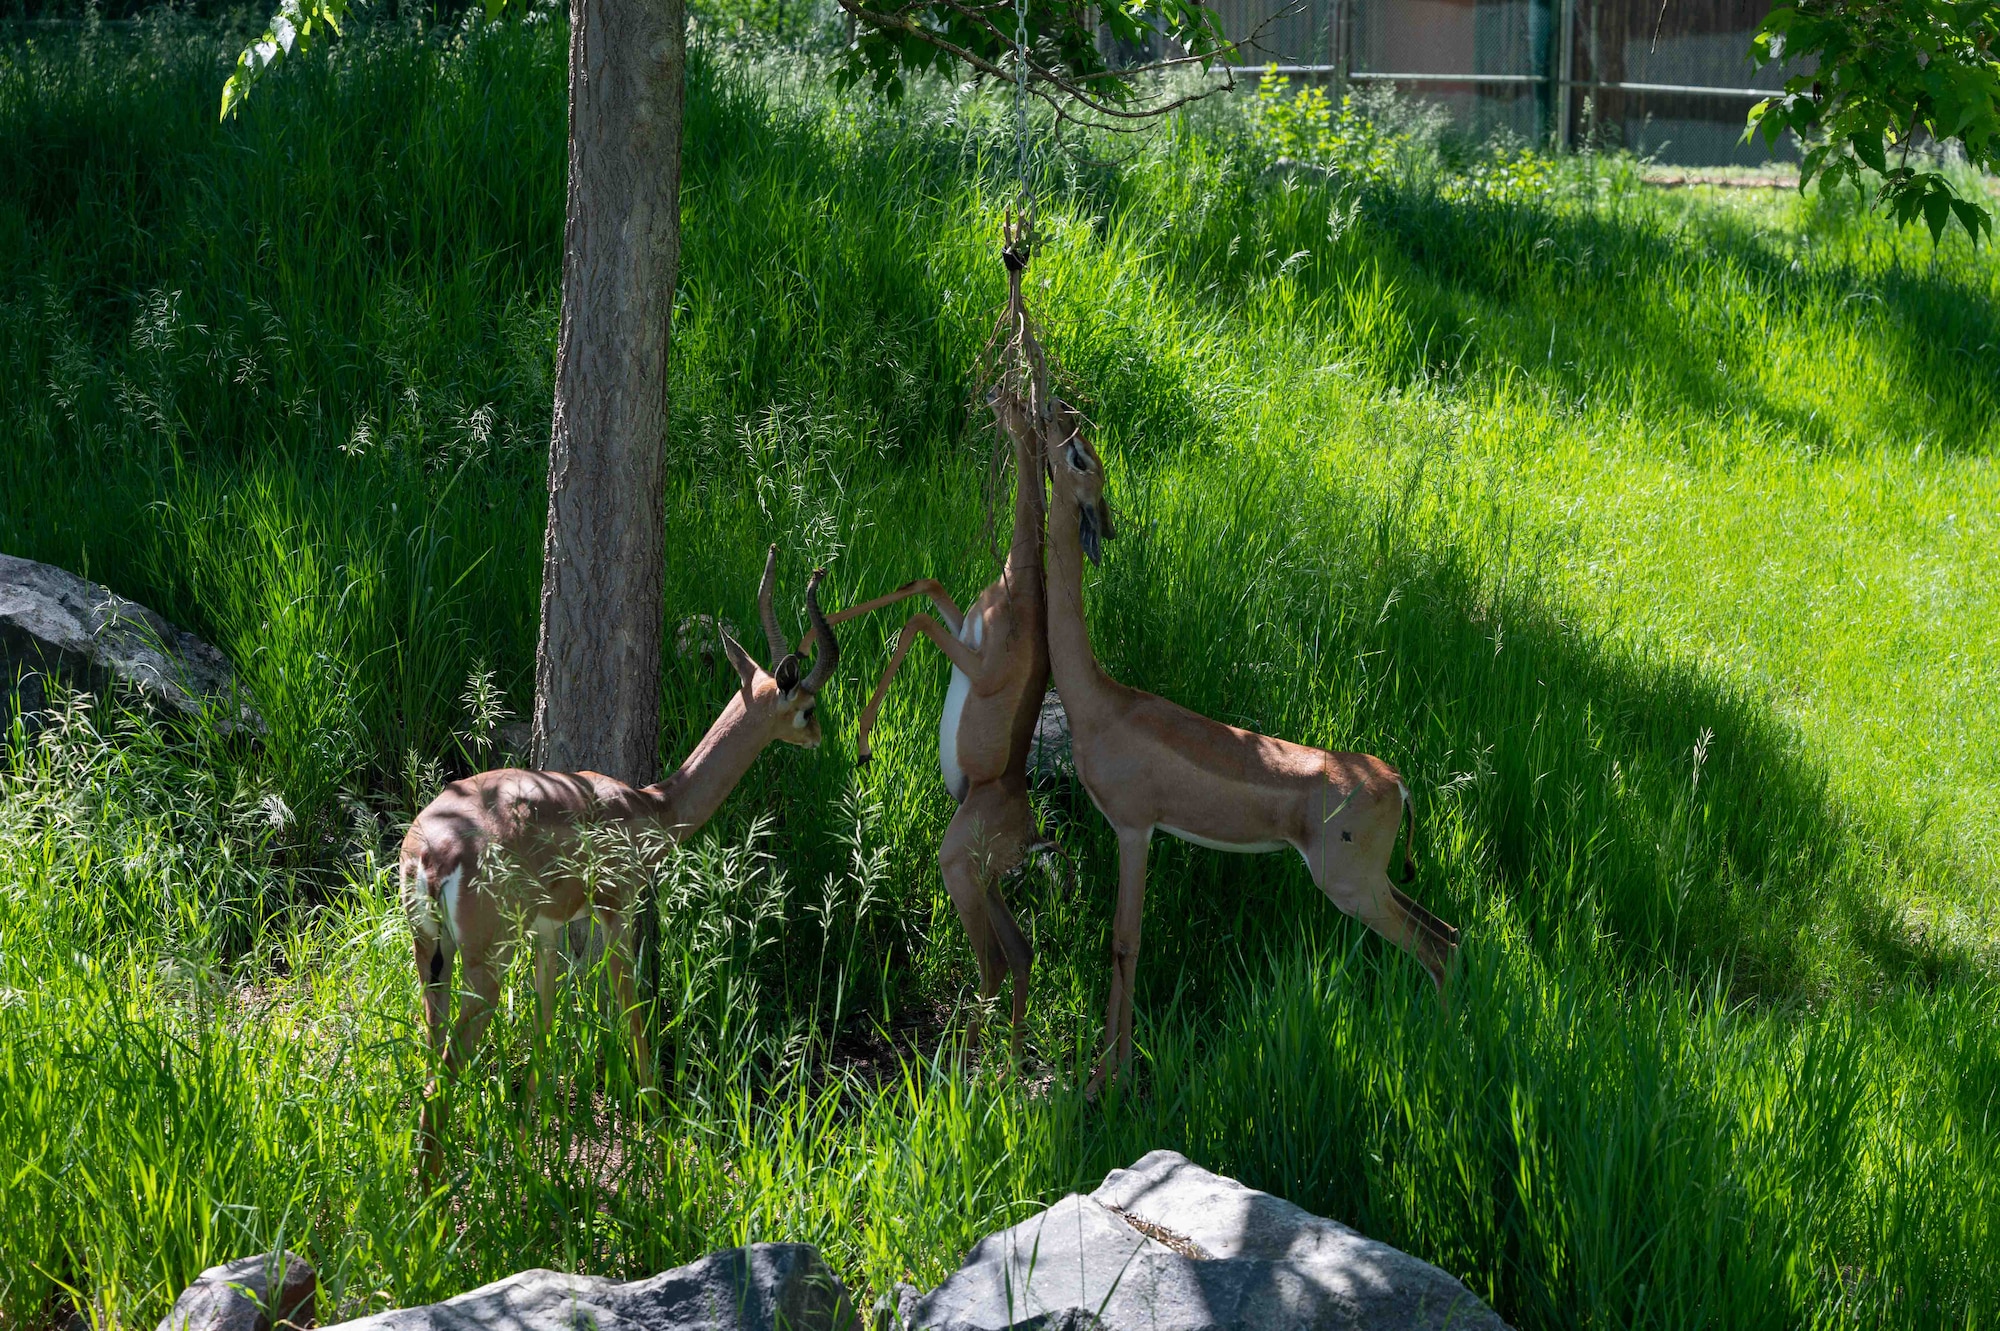 Gazelle at the zoo